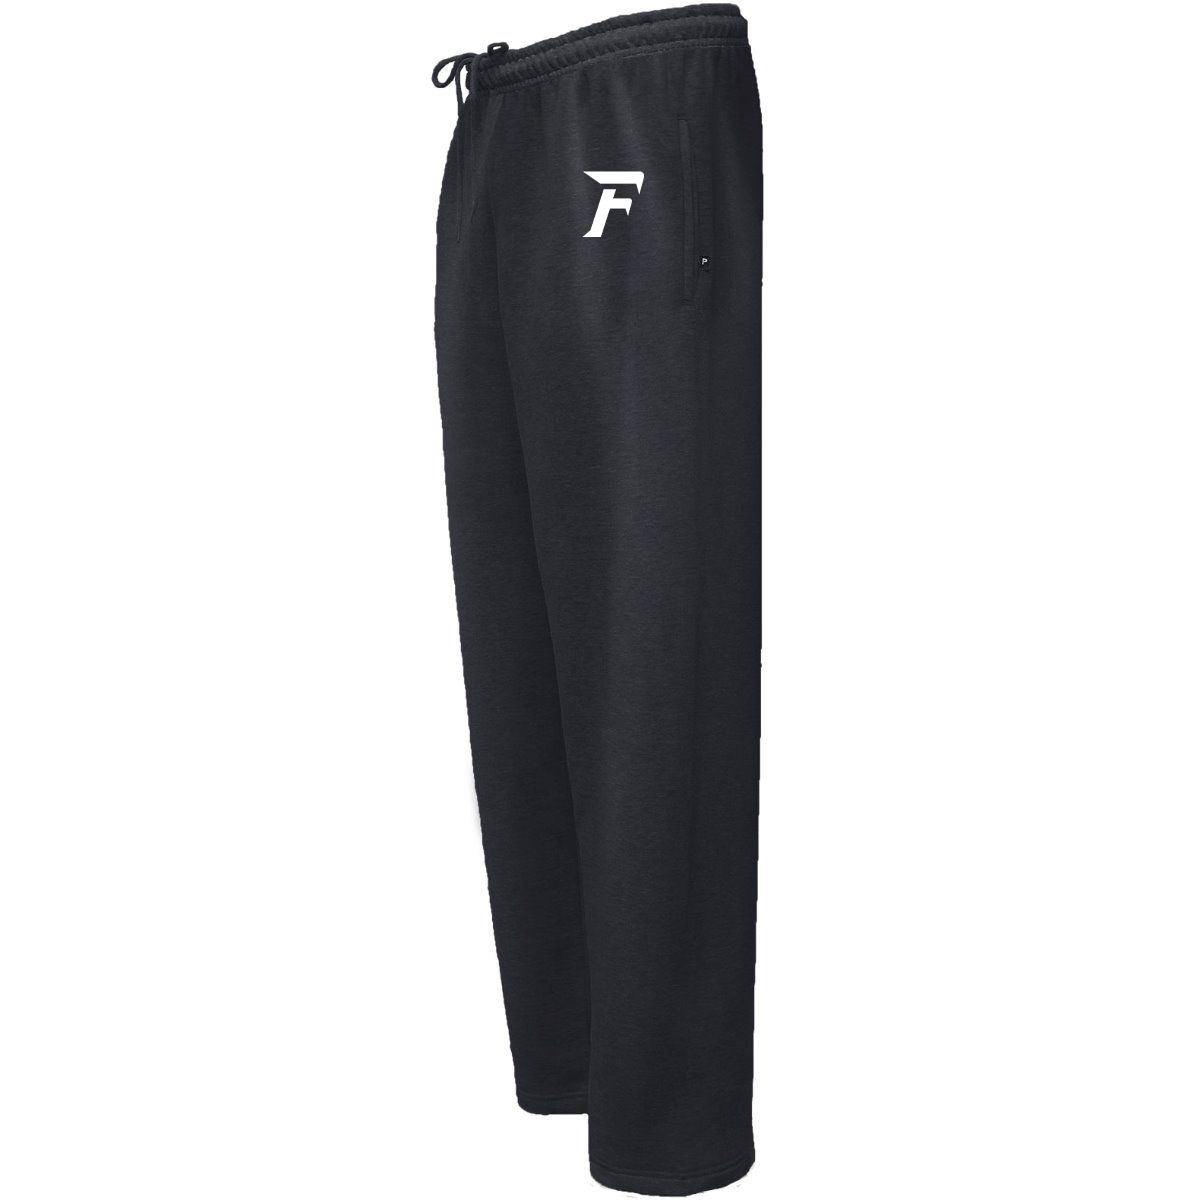 Foothill Falcons Sweatpants